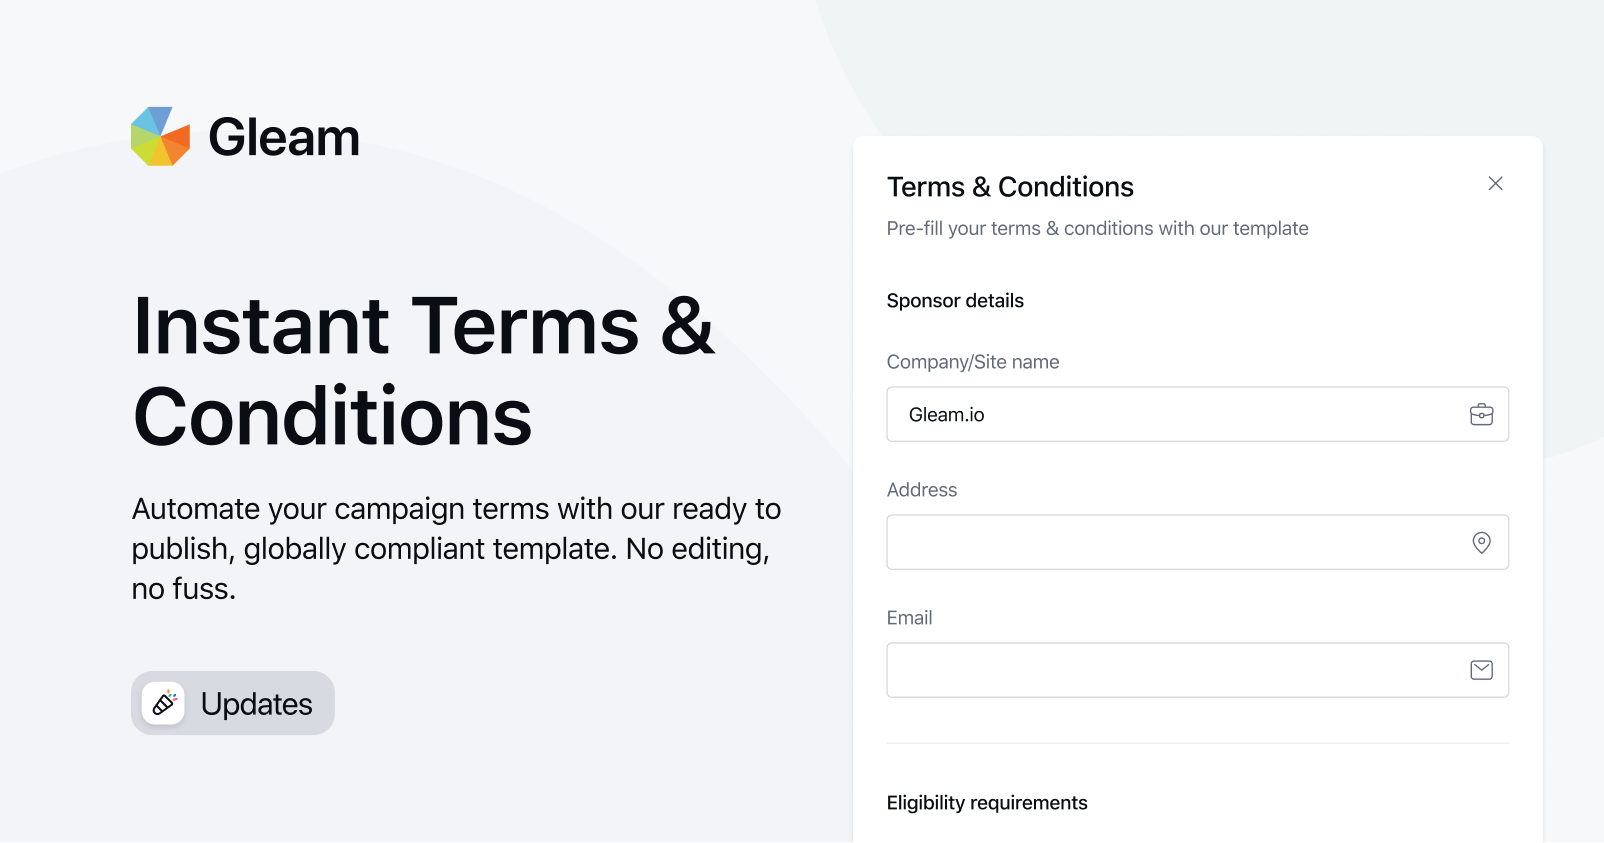 Gleam introduces instant Terms & Conditions feature